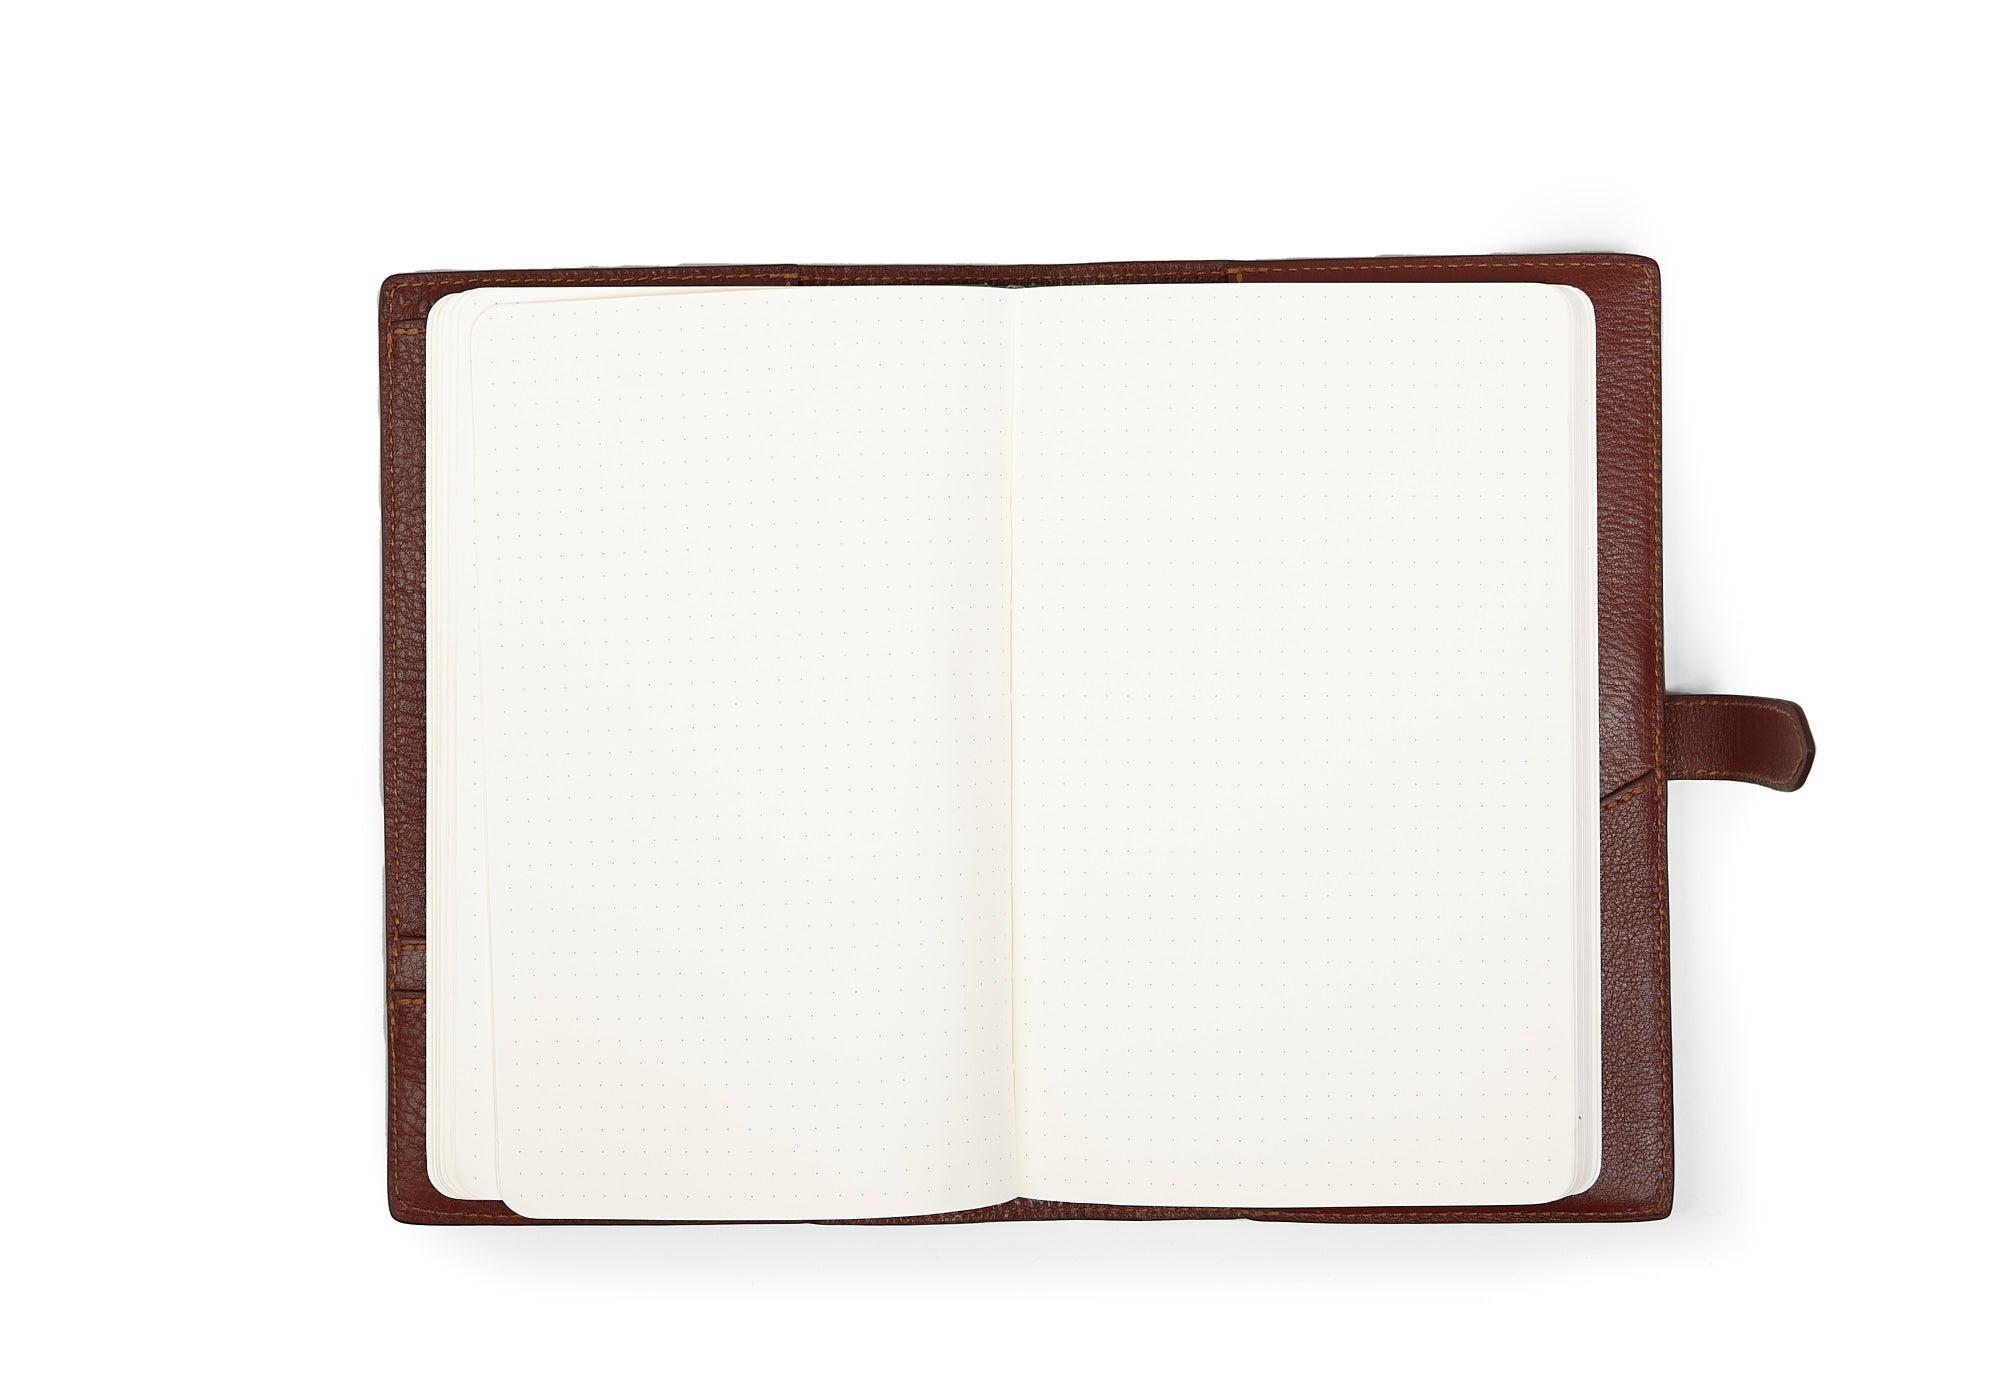 Leather Lotuff Journal - Handmade Leather Accessories